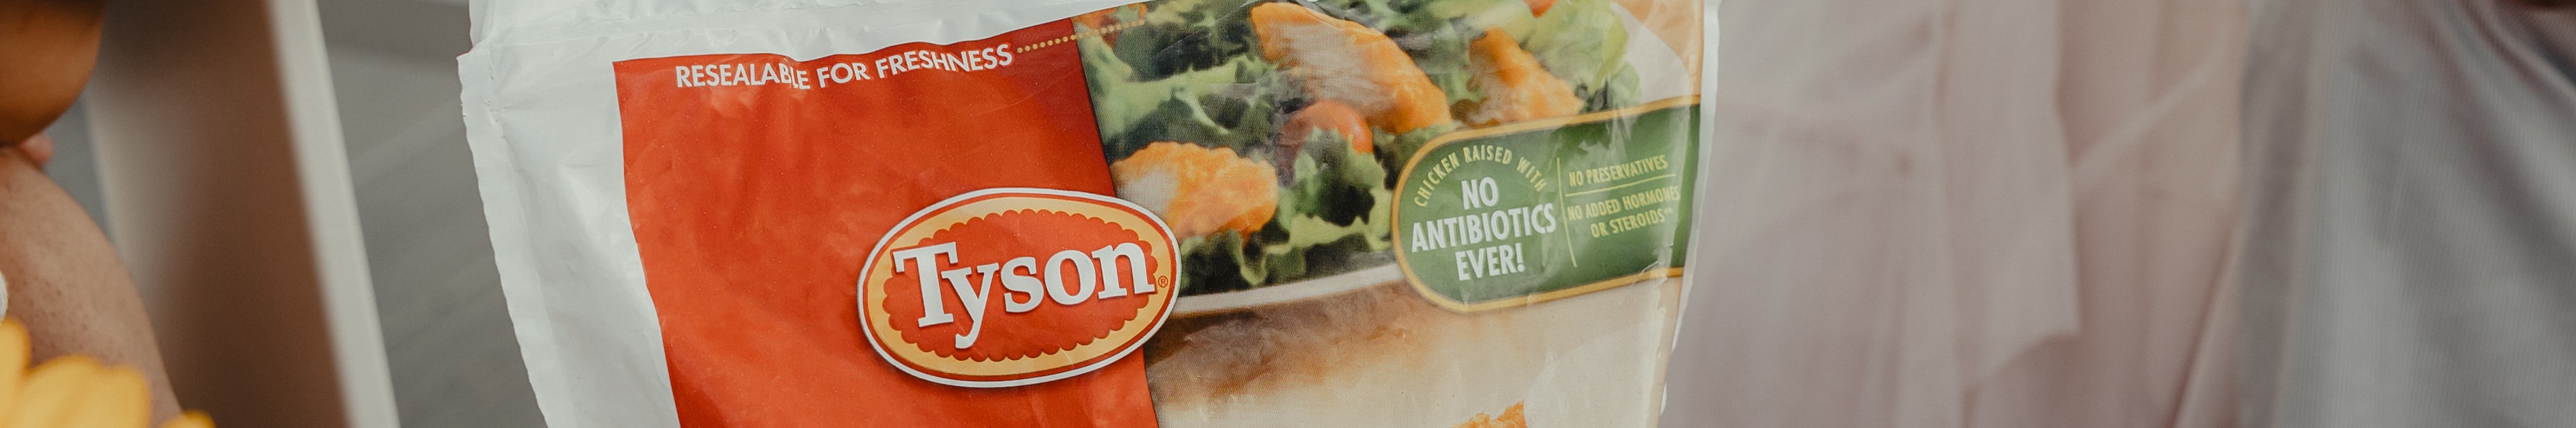 Tyson Foods is contaminating waters, thus killing marine life and minimizing economic potential